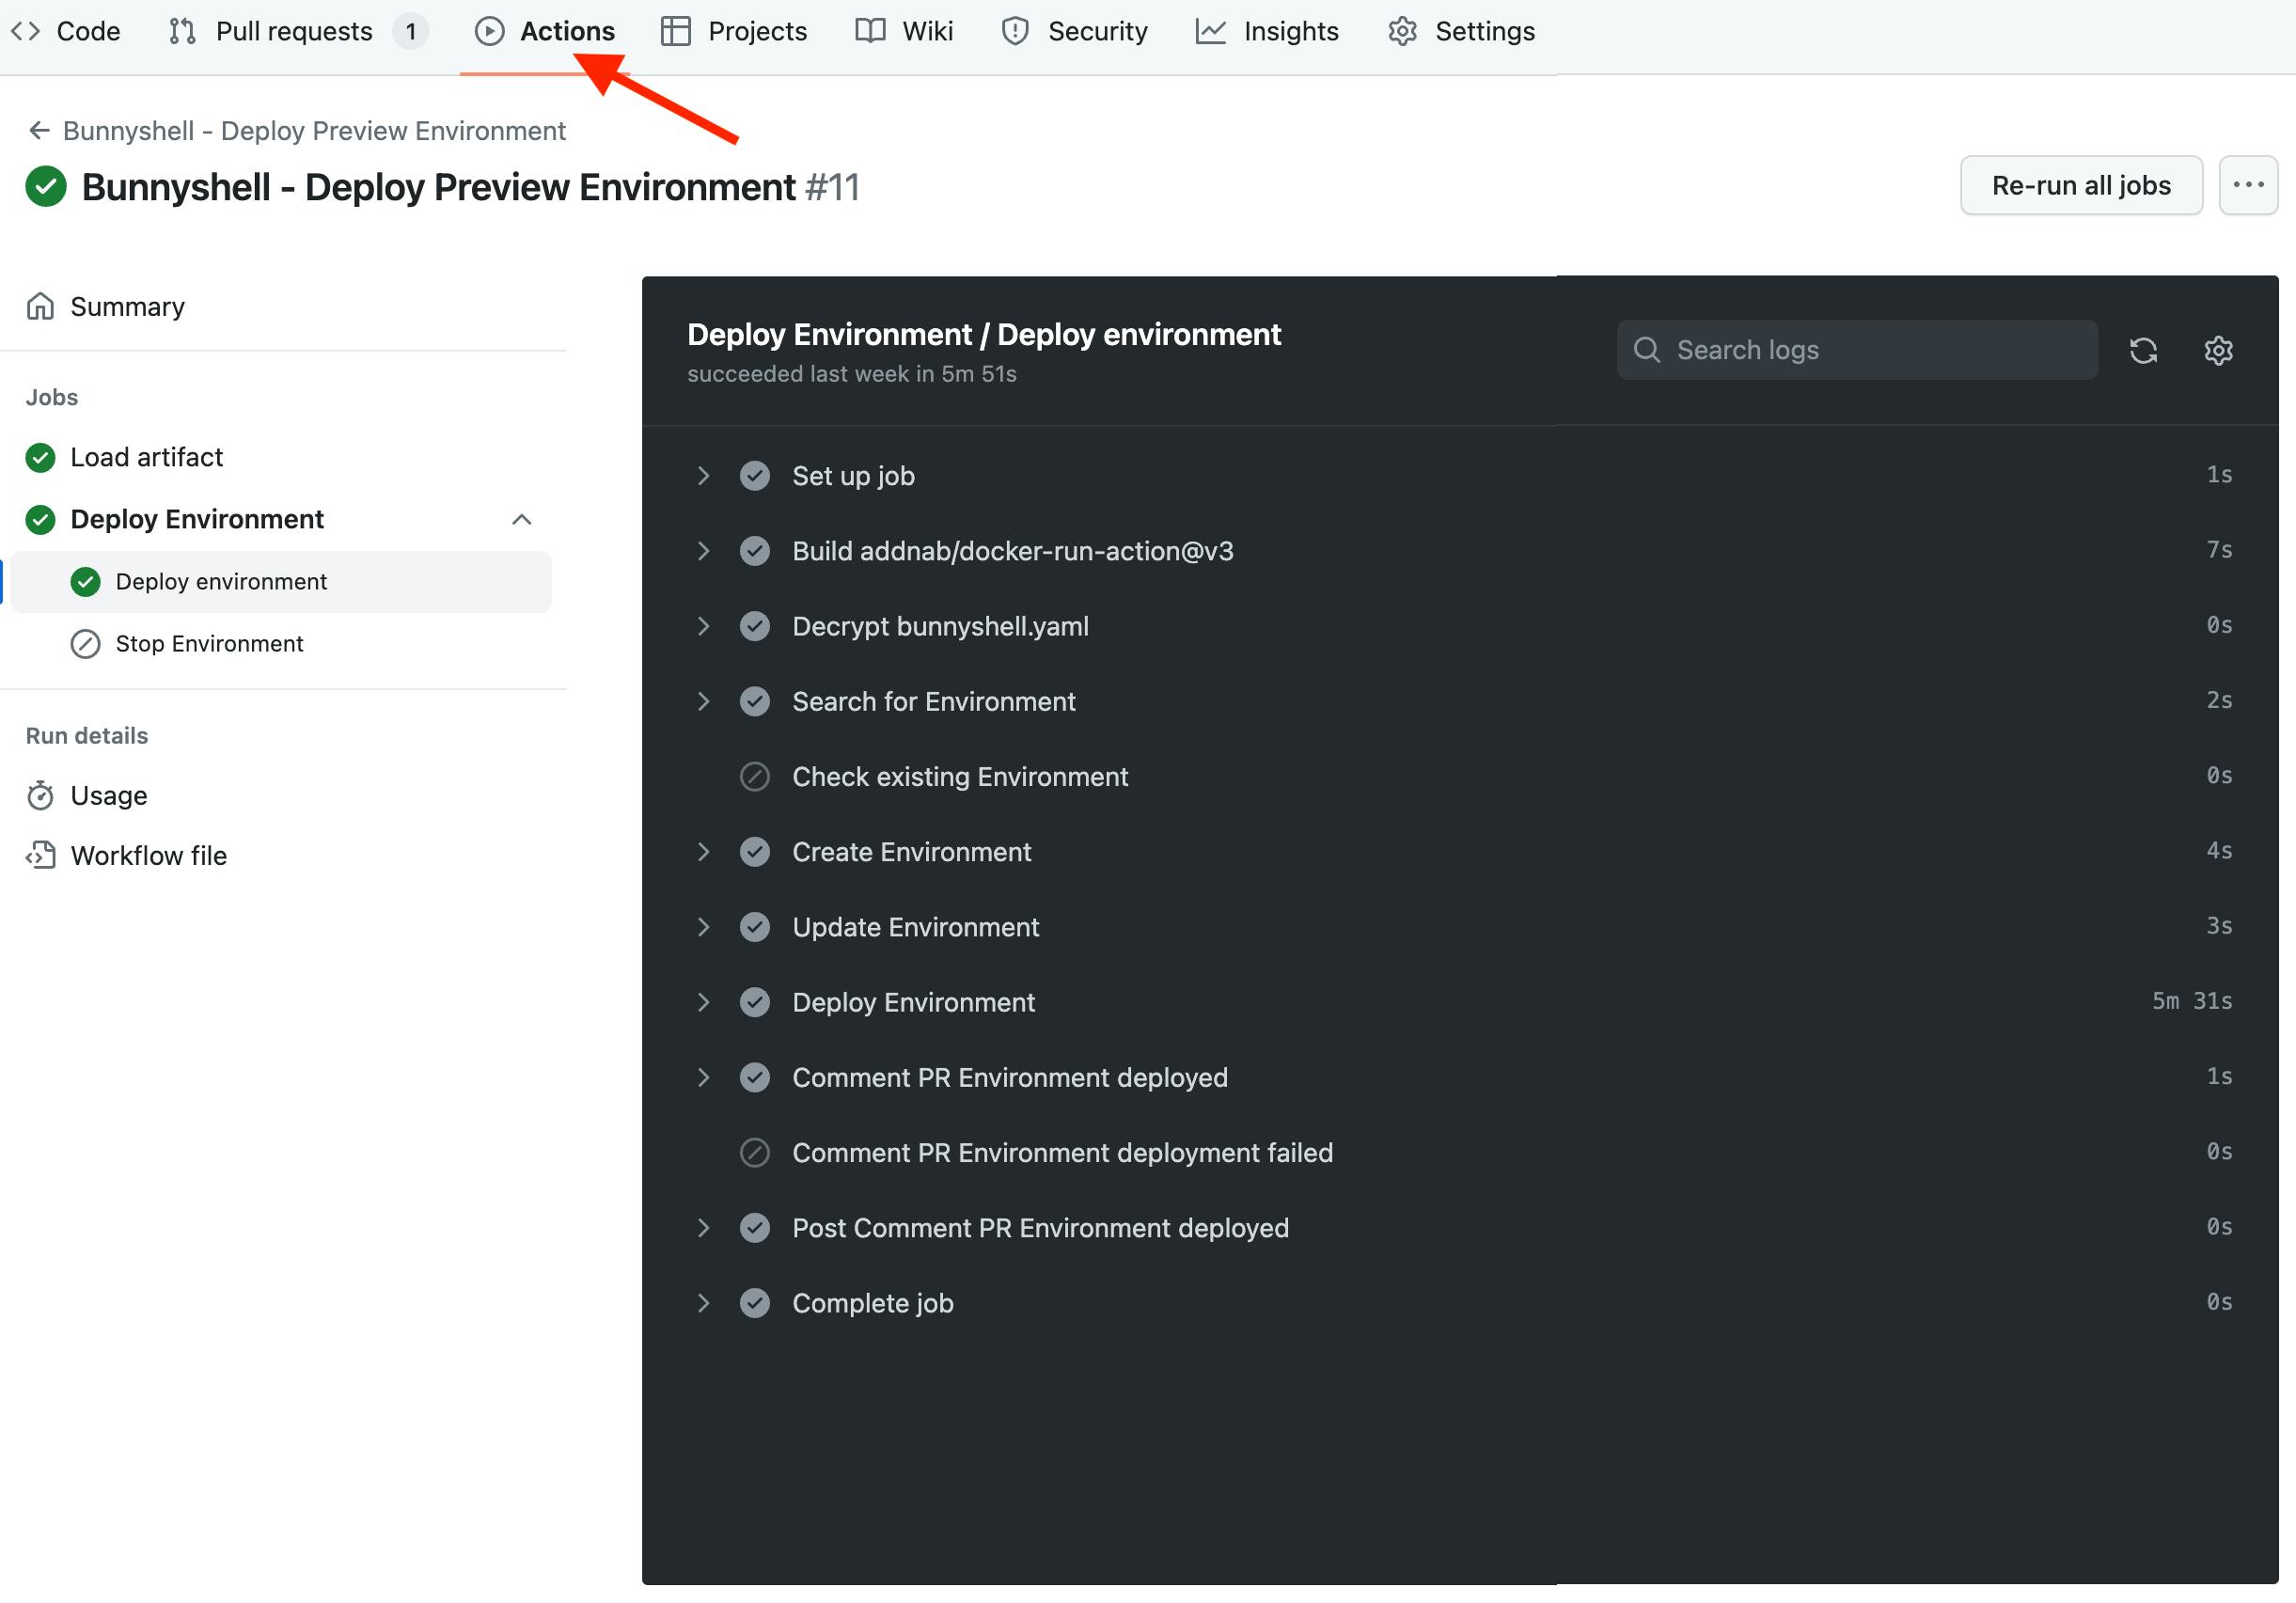 Github Actions dashboard with the workflows deployment logs.